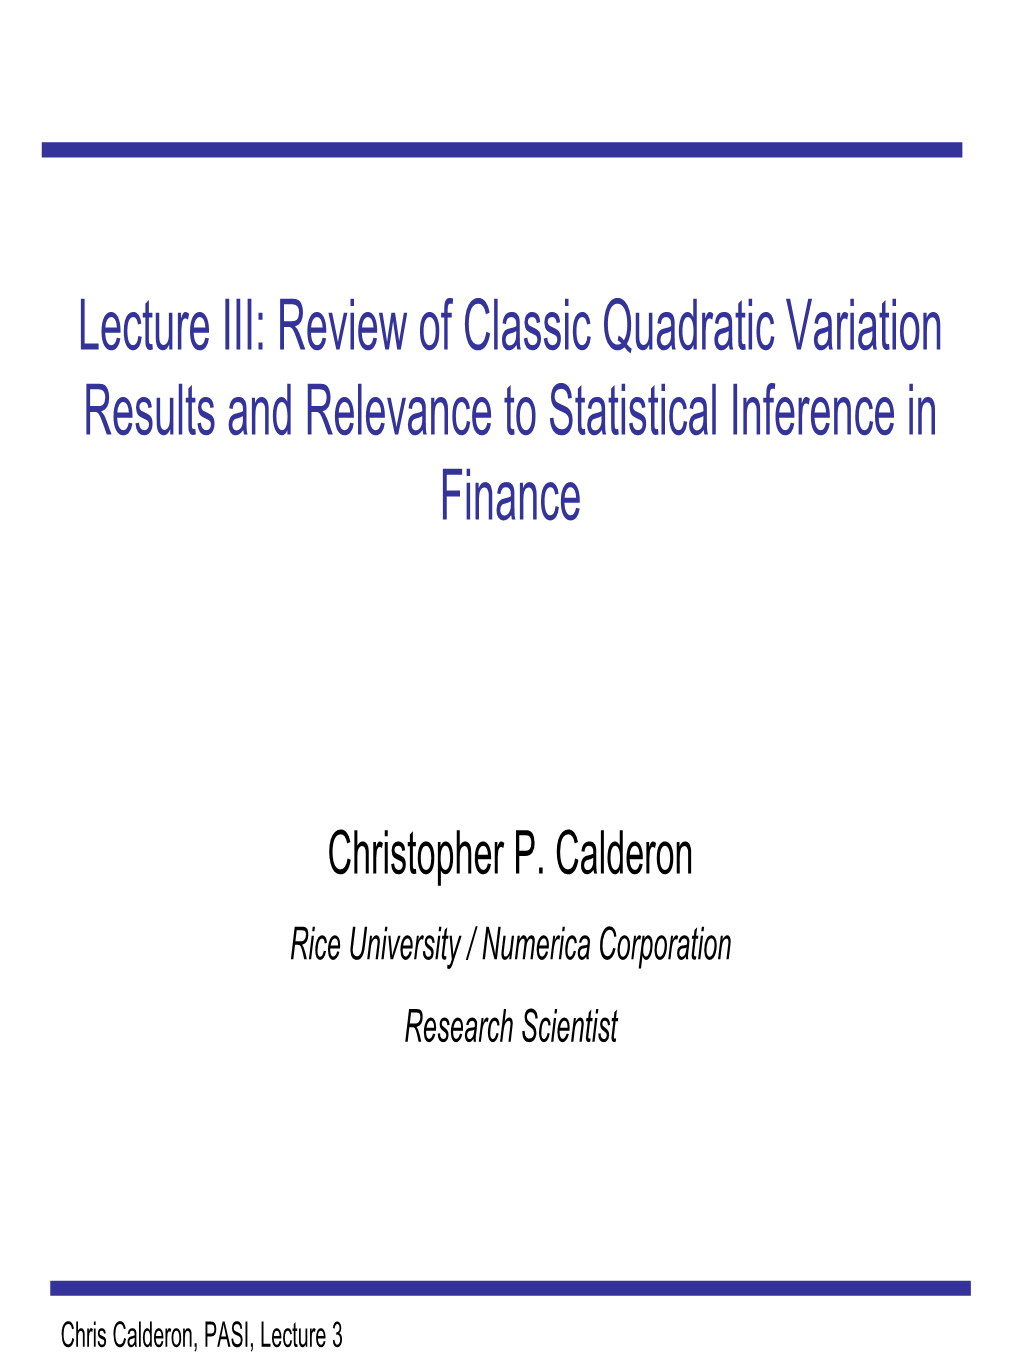 Lecture III: Review of Classic Quadratic Variation Results and Relevance to Statistical Inference in Finance